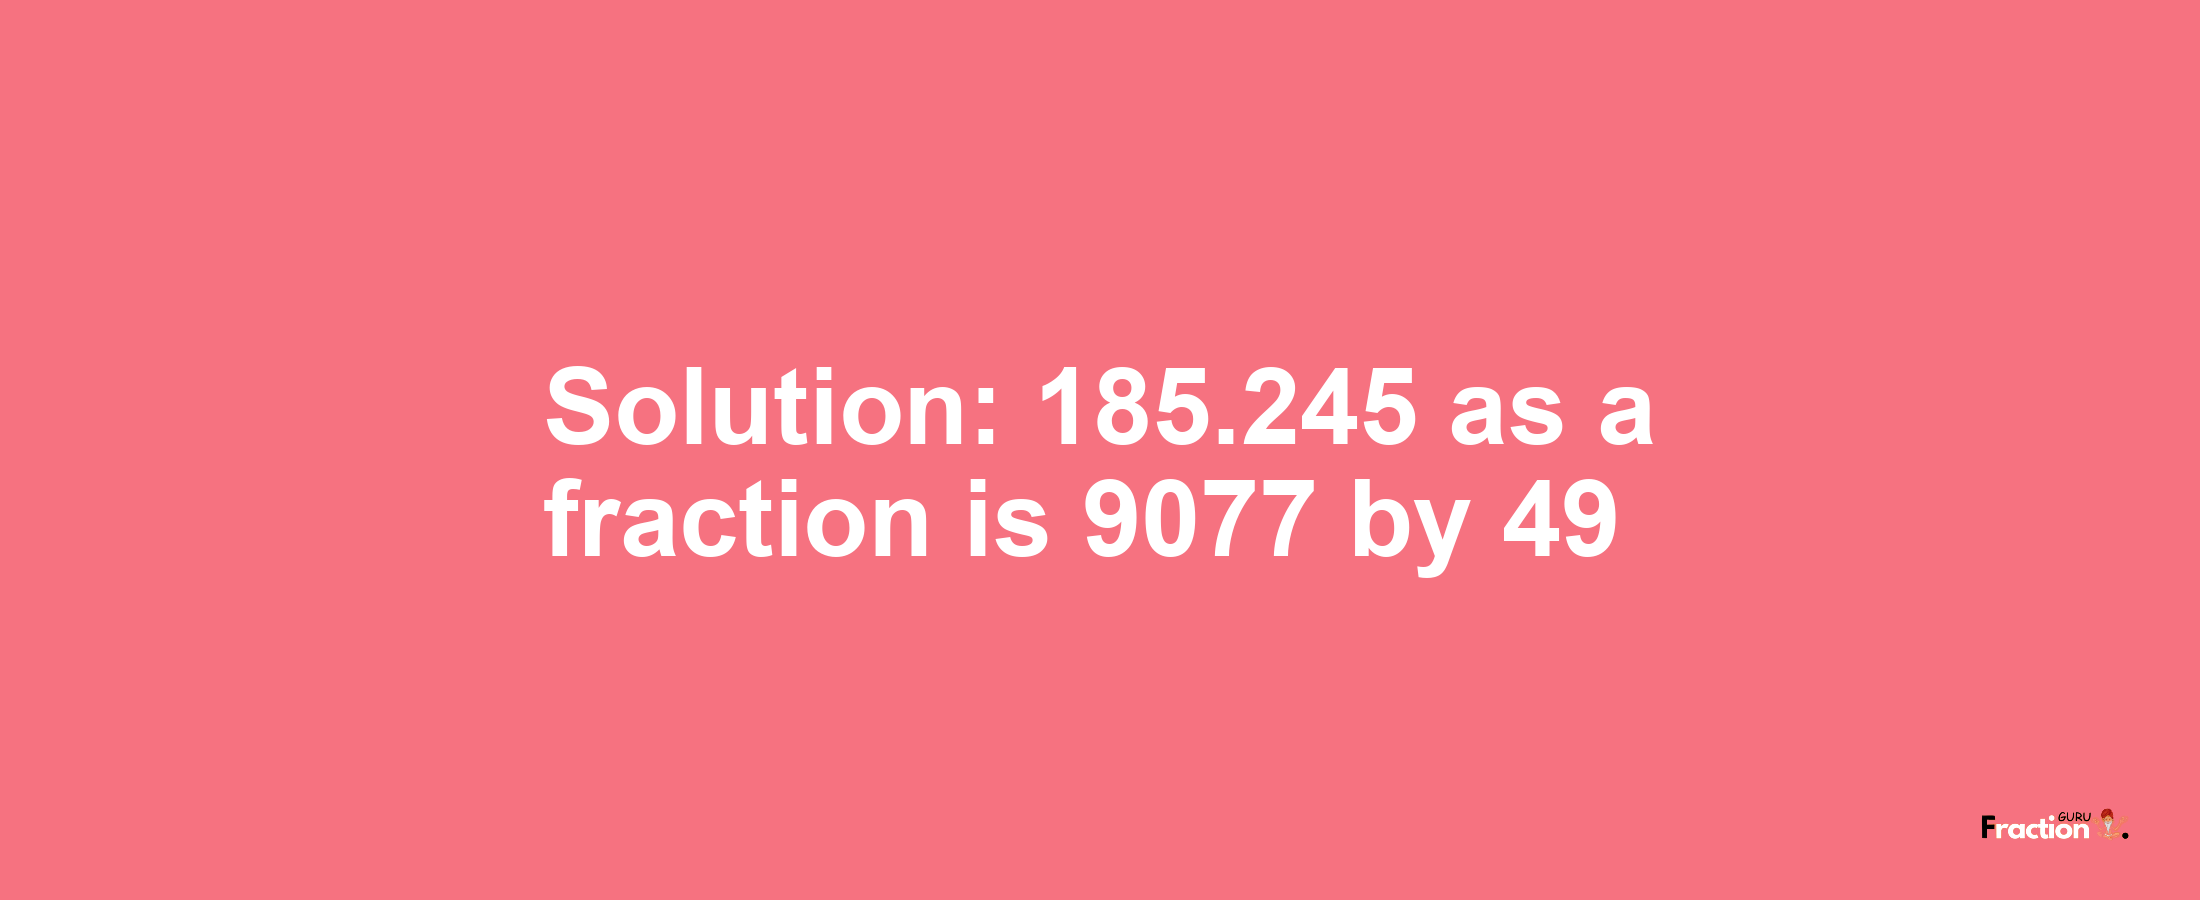 Solution:185.245 as a fraction is 9077/49